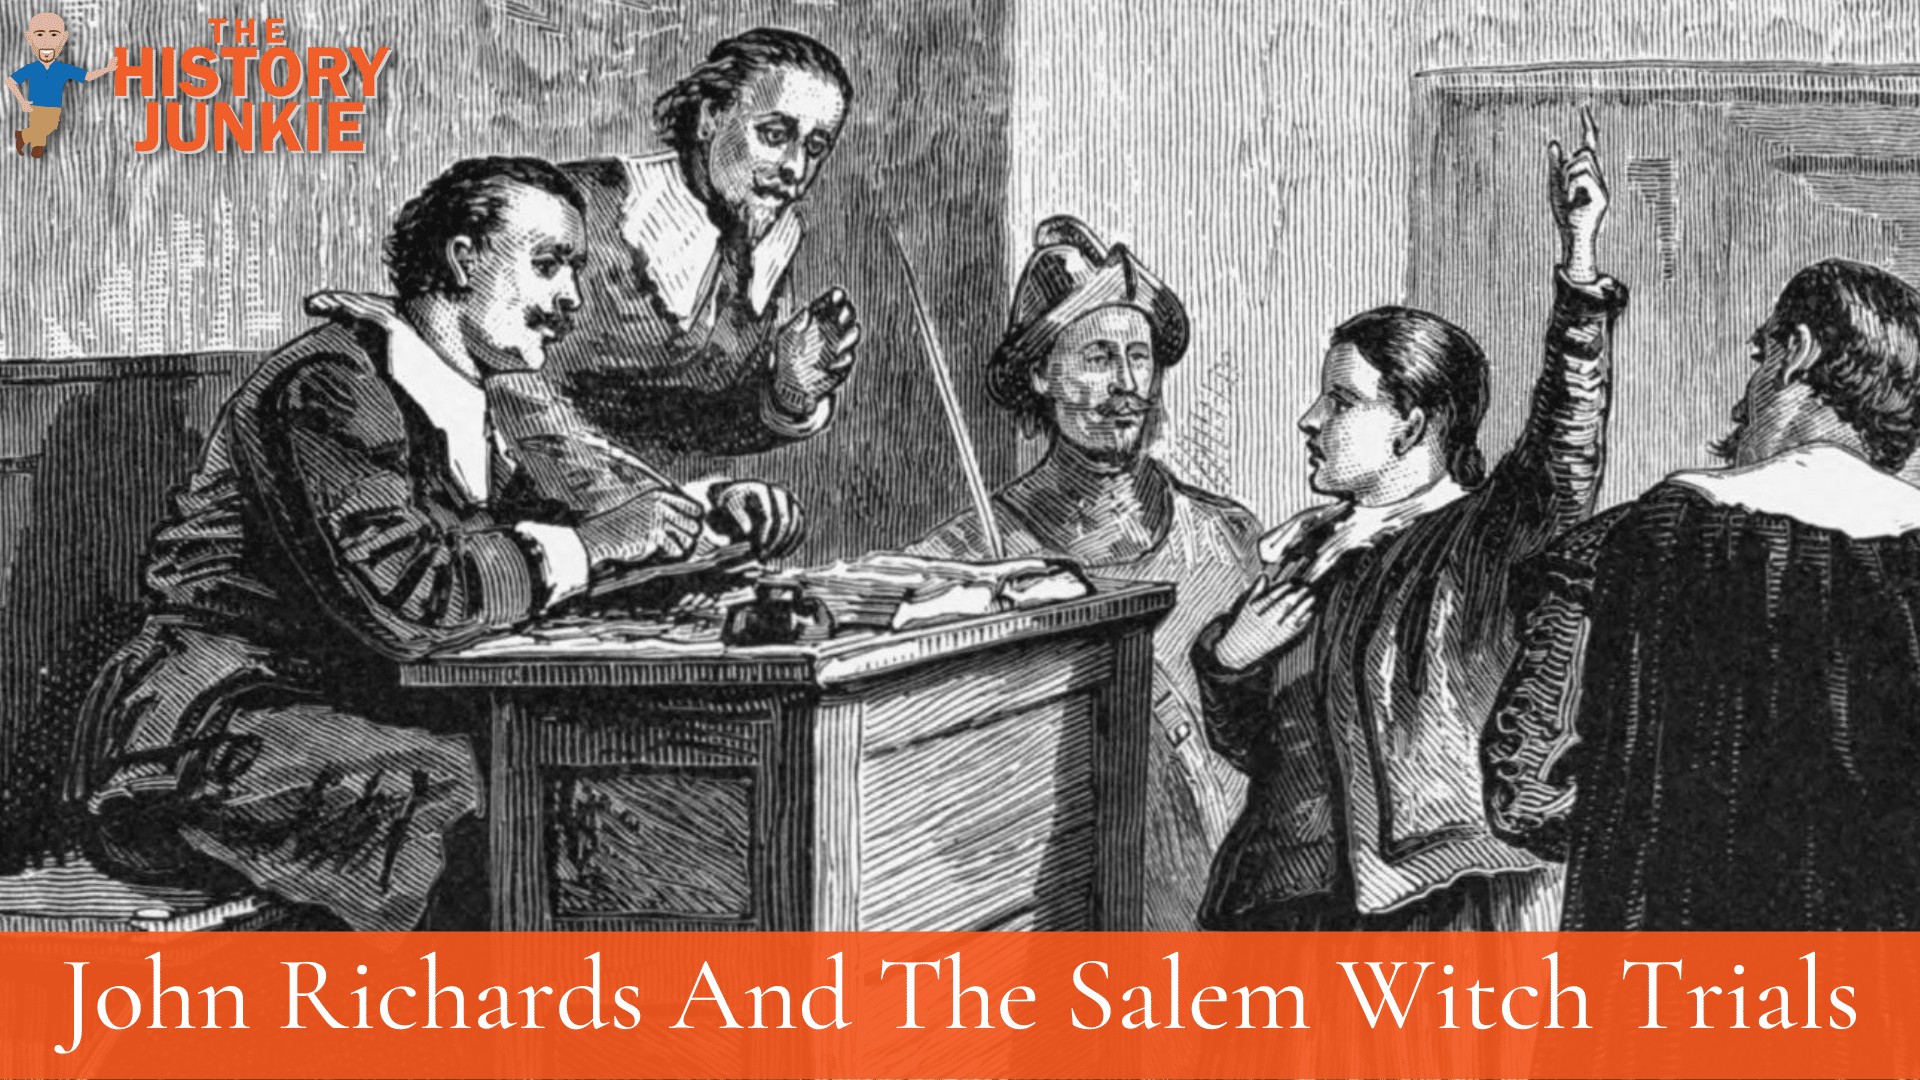 John Richards and the Salem Witch Trials